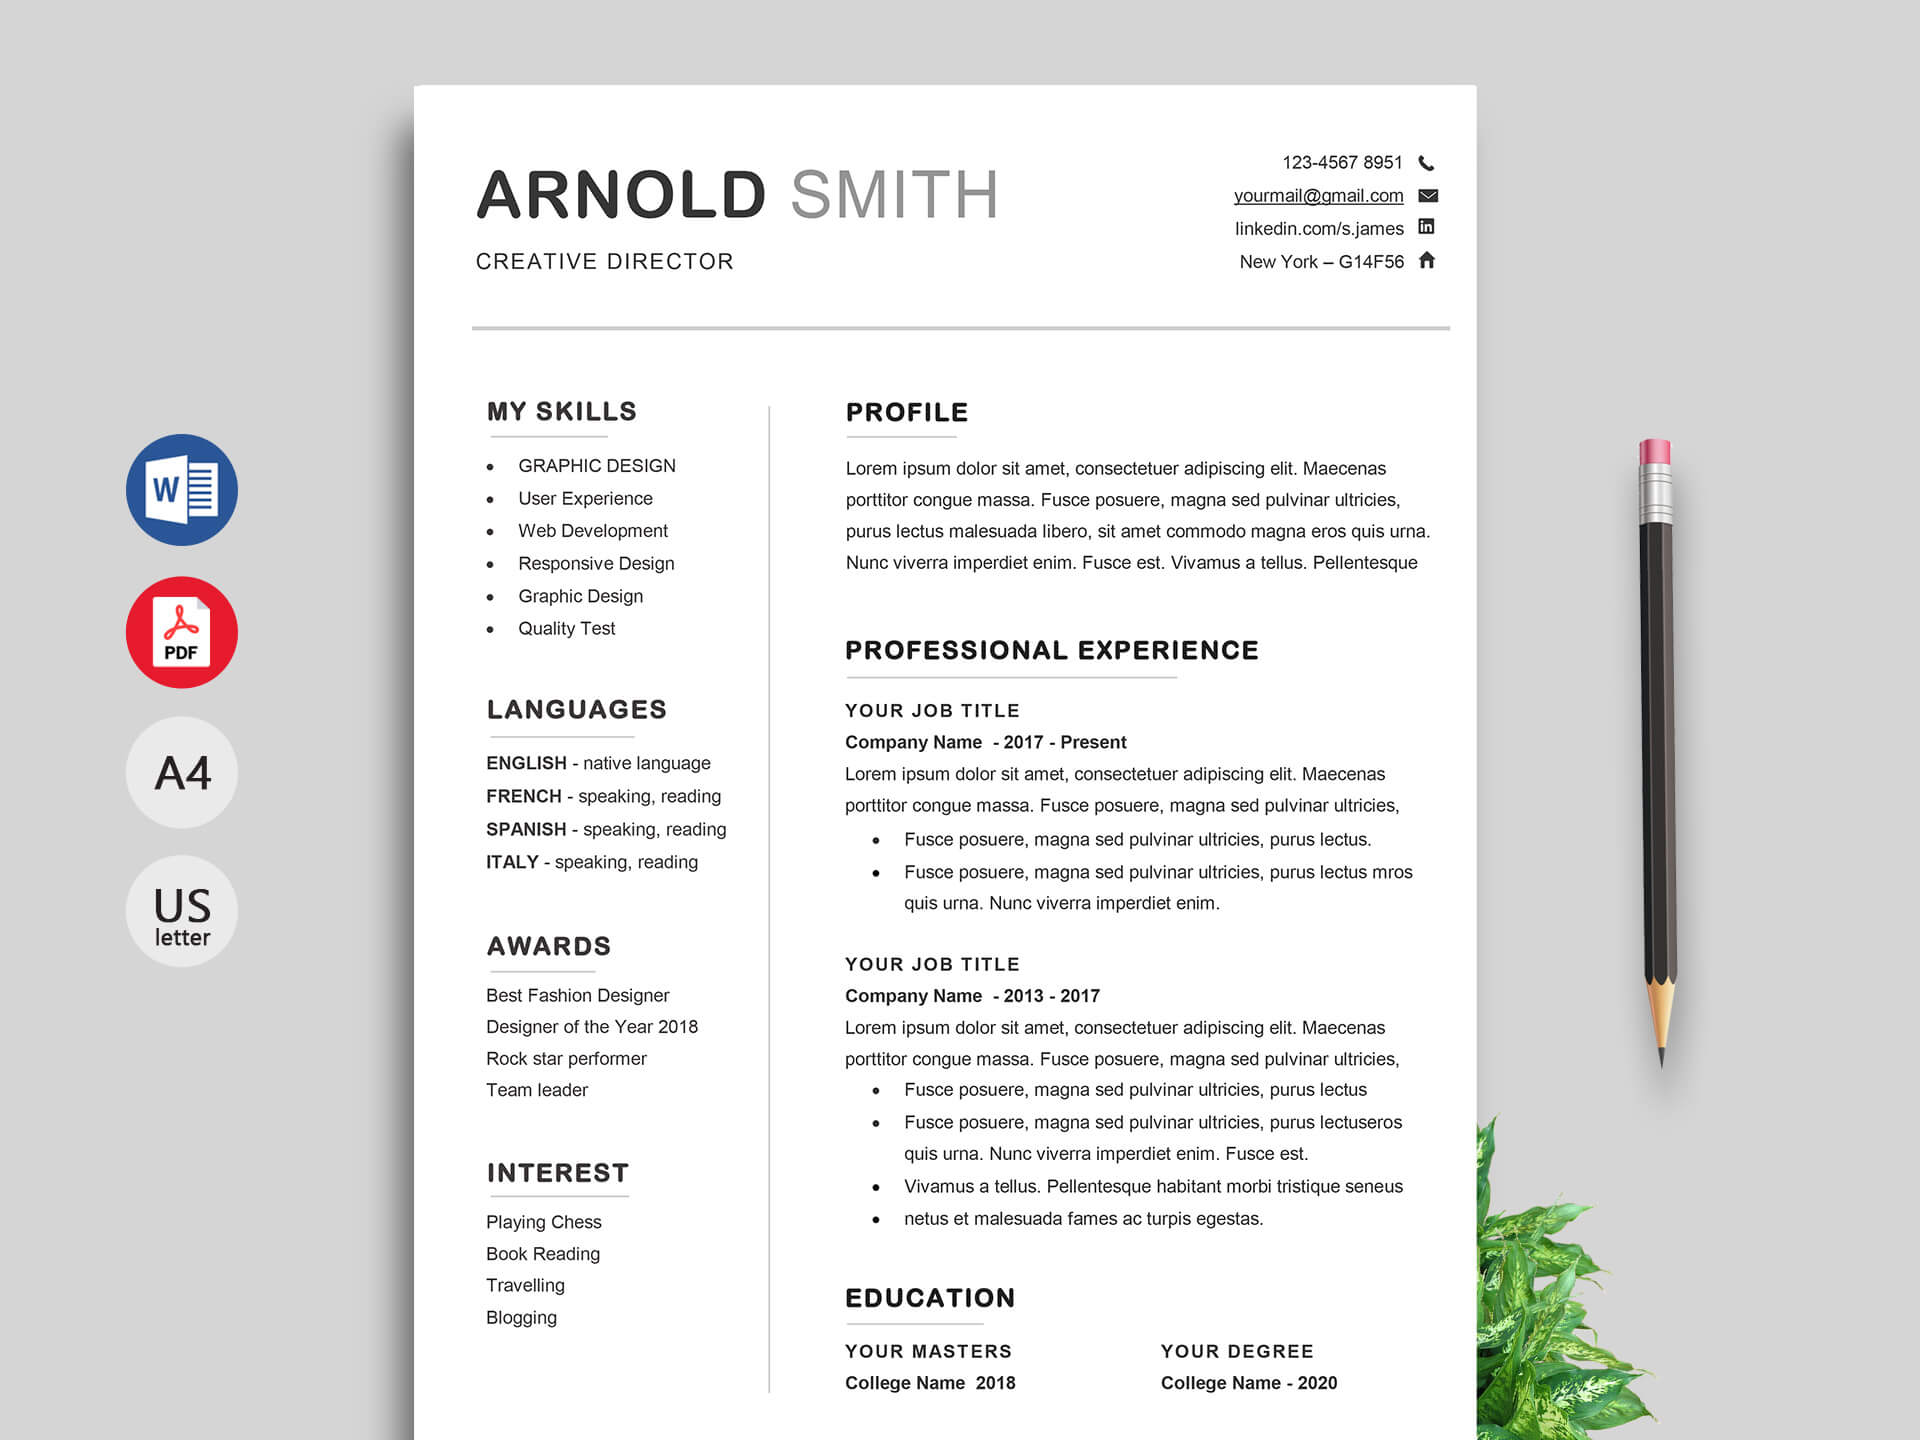 010 Resume Templates Free Downloads For Microsoft Word Regarding Free Blank Resume Templates For Microsoft Word